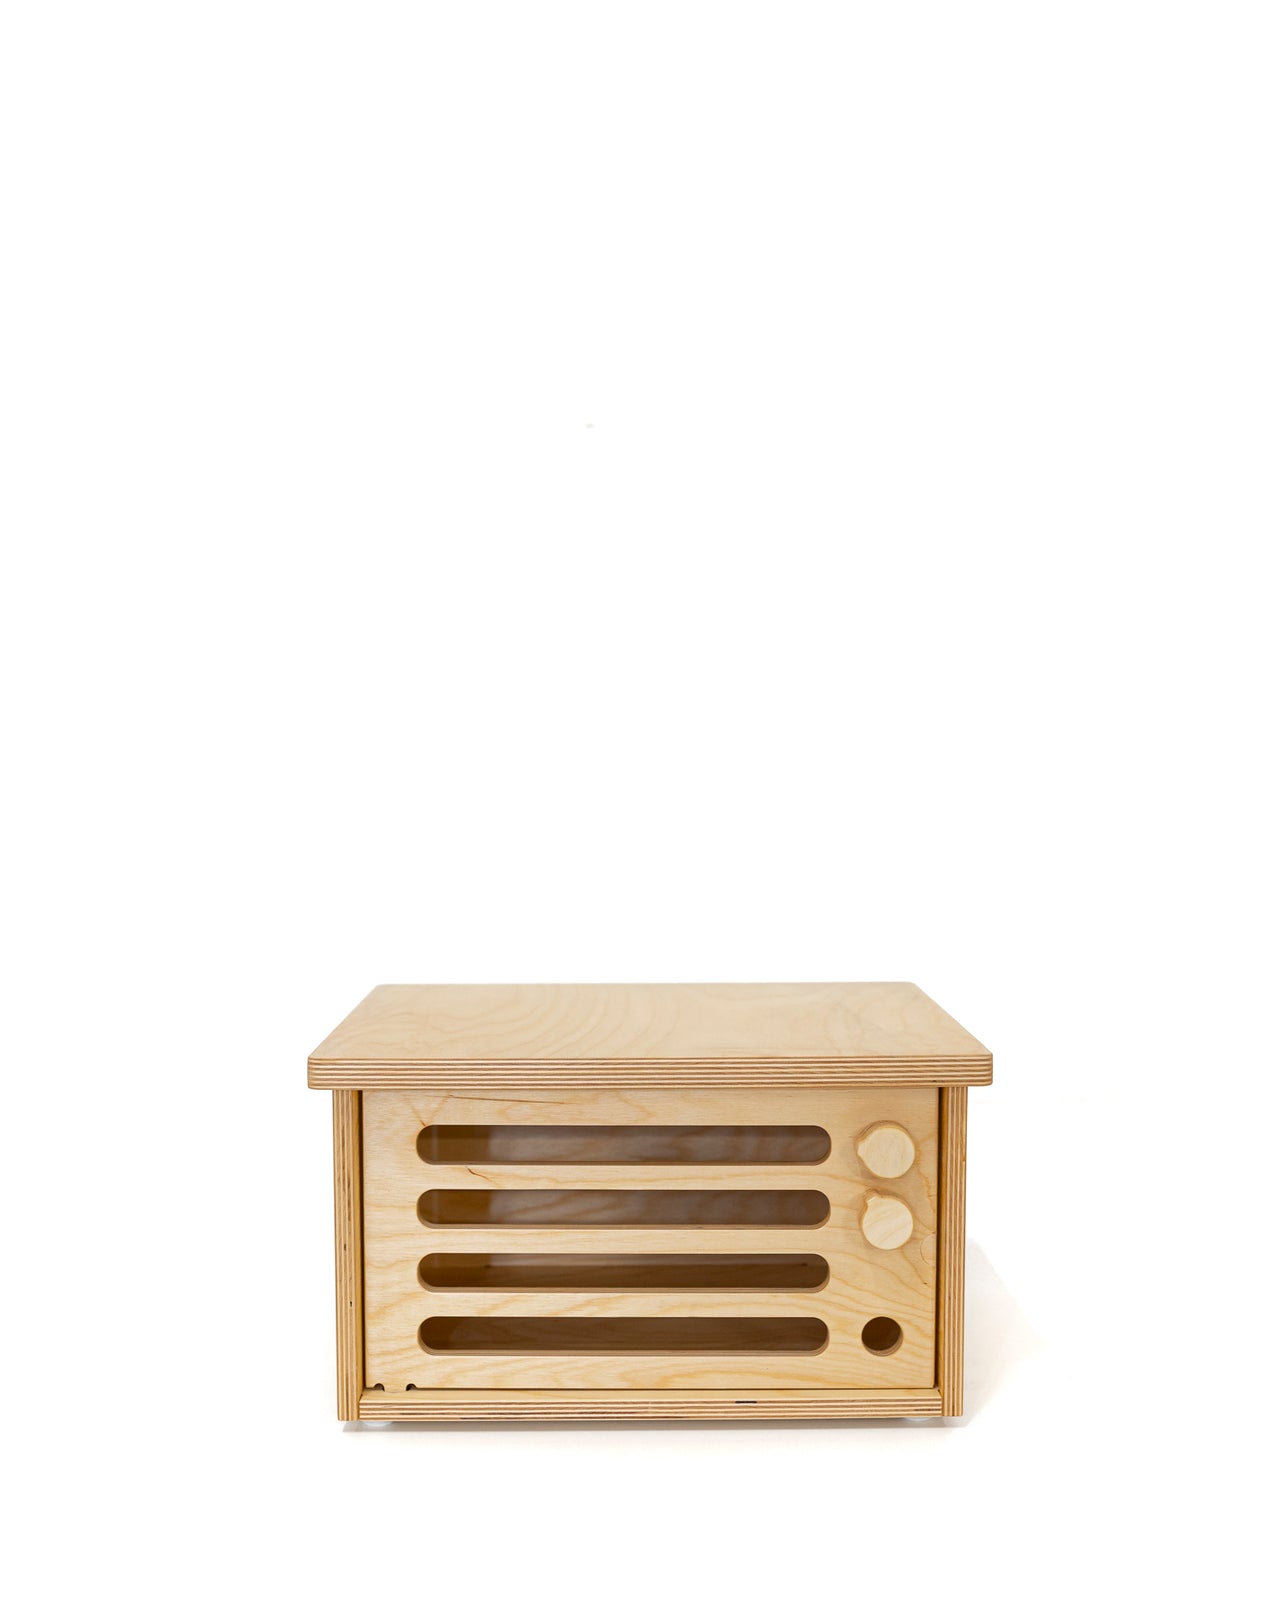 Play Oven - Natural Wood - MIDMINI - Handcrafted wooden toys for generations.